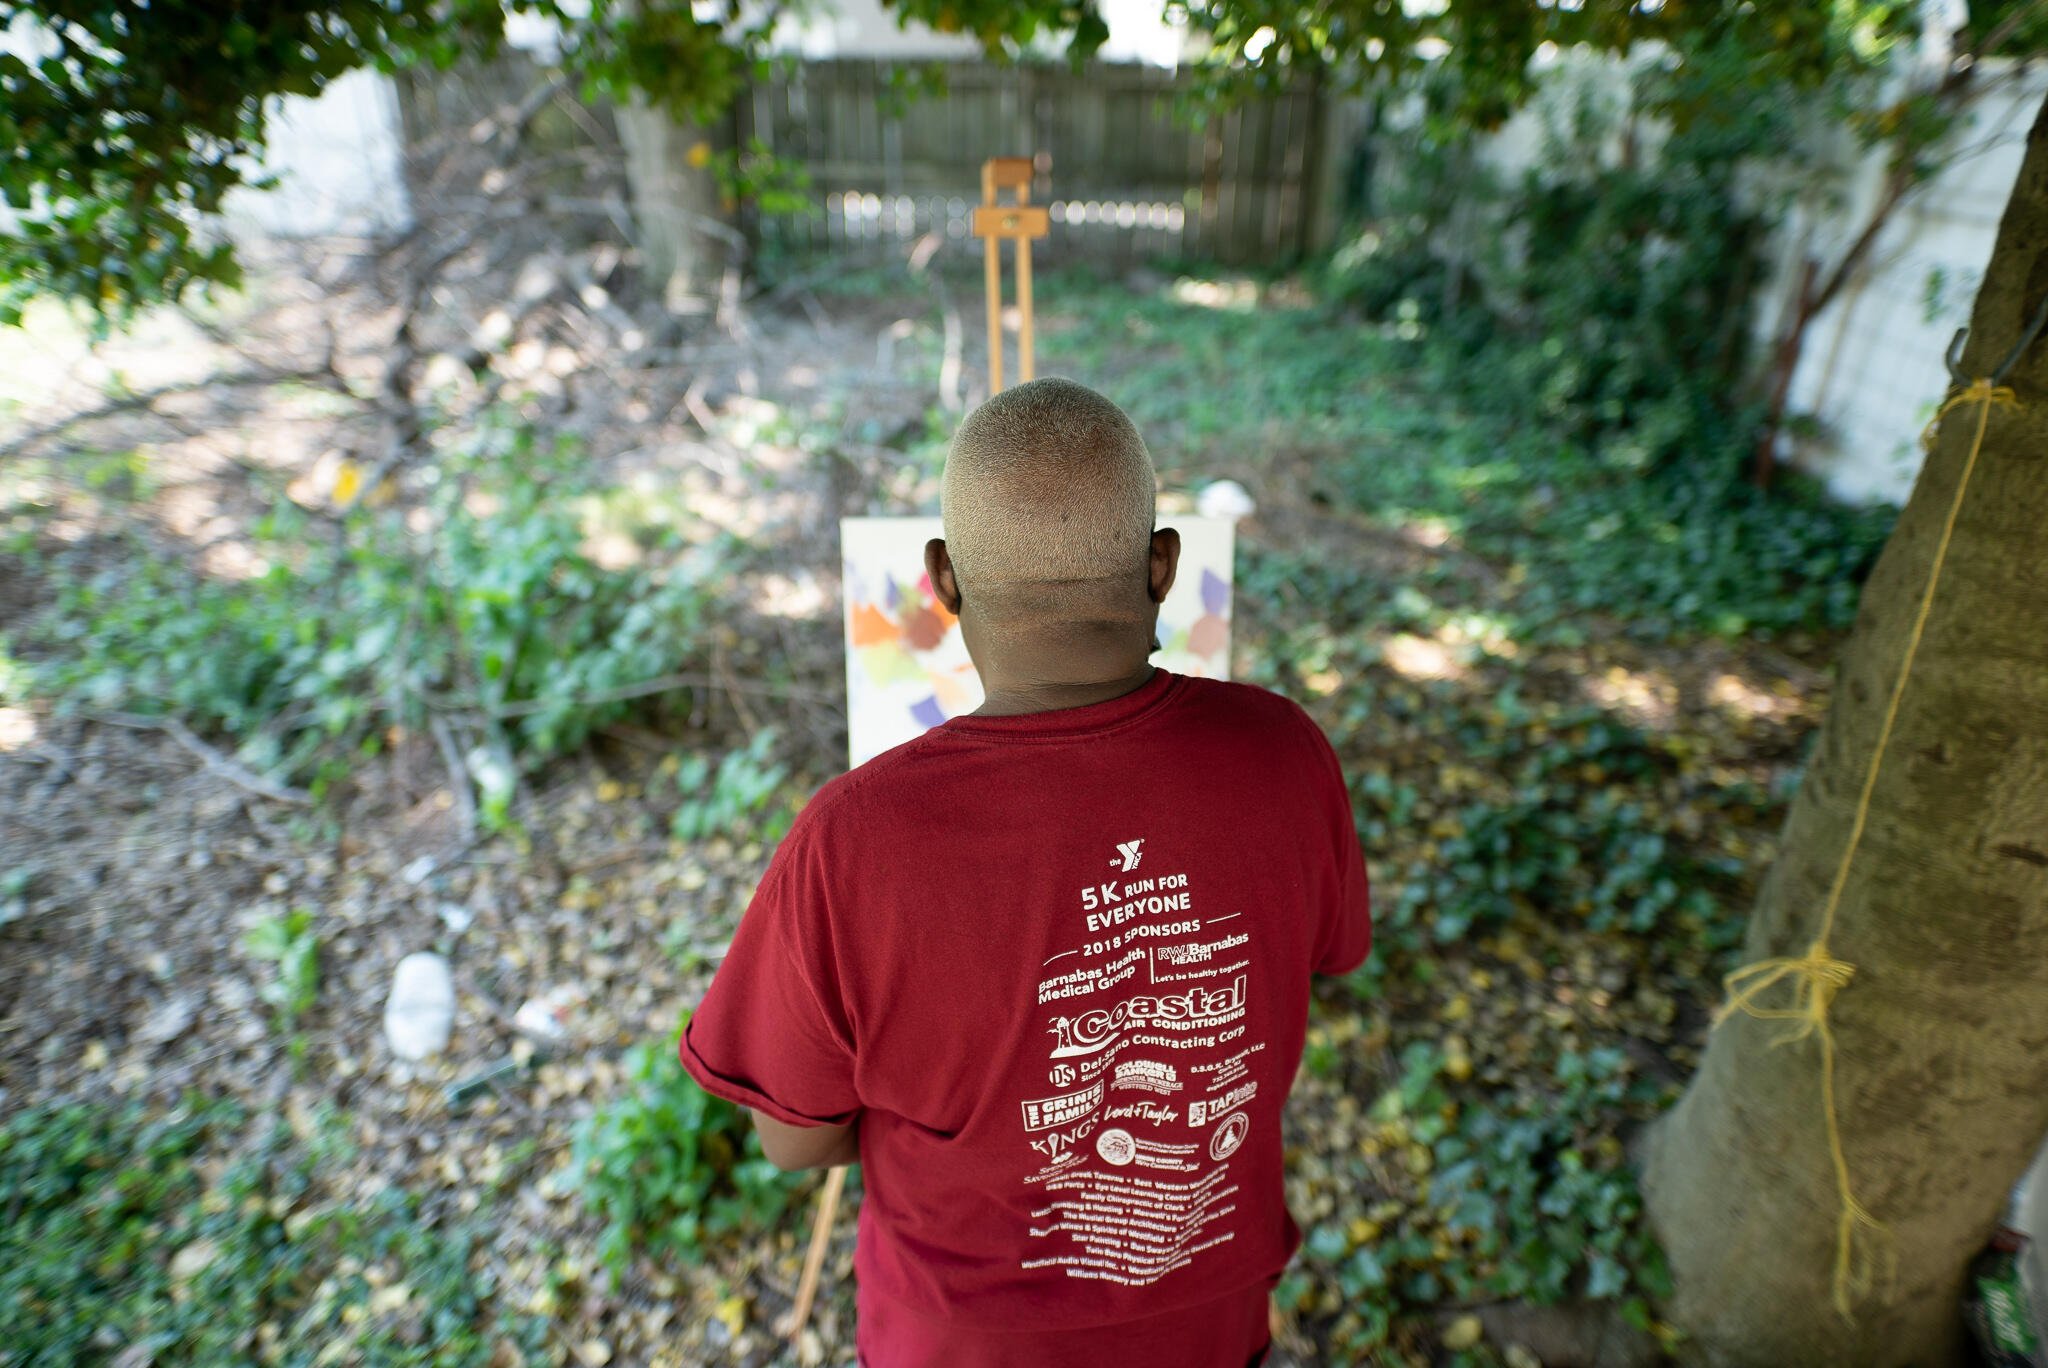 Congolese artist Muyambo Marcel Chishimba, seen from the back wearing a t-shirt, paints an oil painting at an easel in his New Jersey backyard